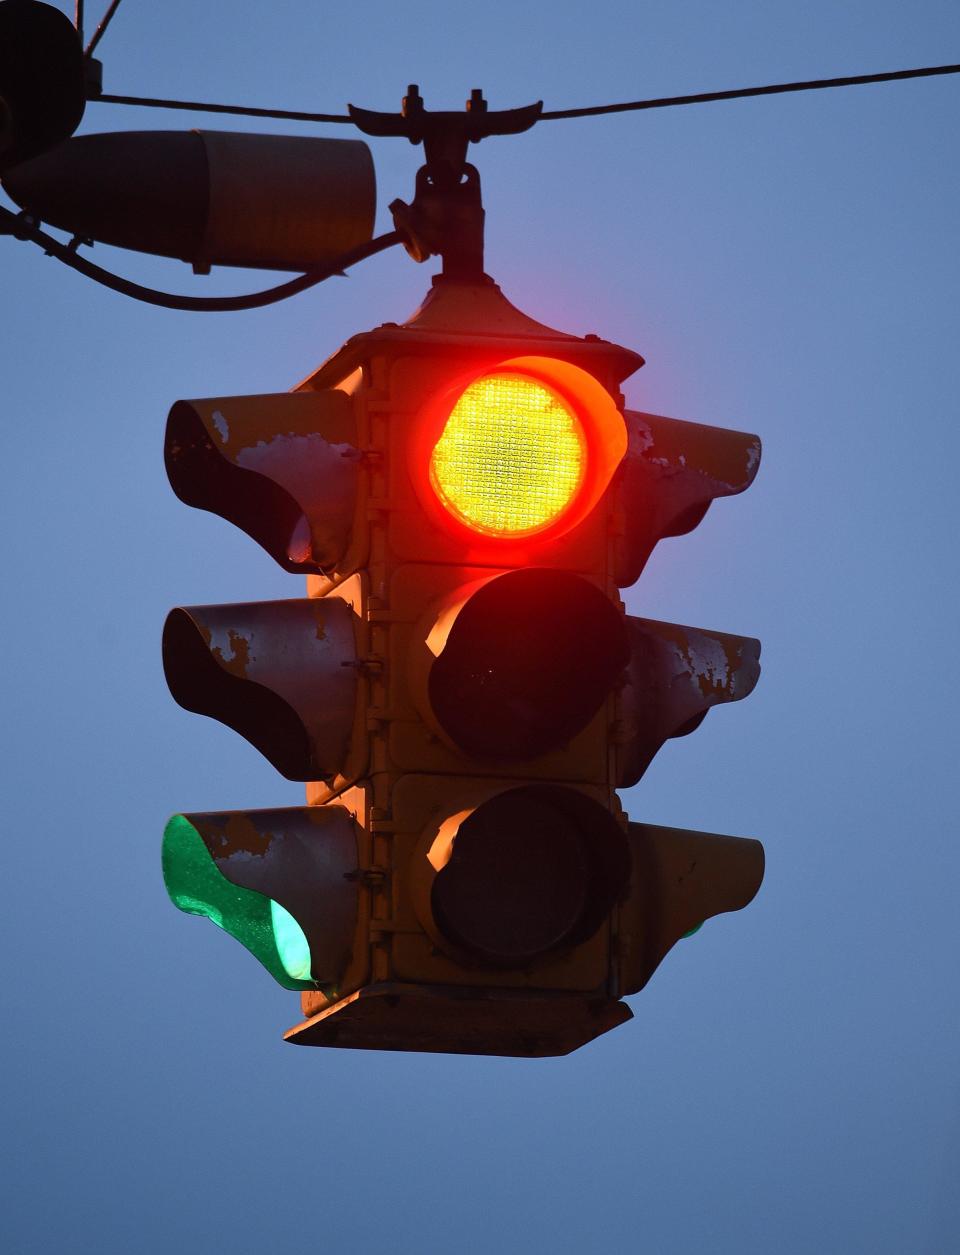 Running through a red light on Easton Road in Warrington could cost you $100 once cameras at two intersections go live at the end of January 2023.